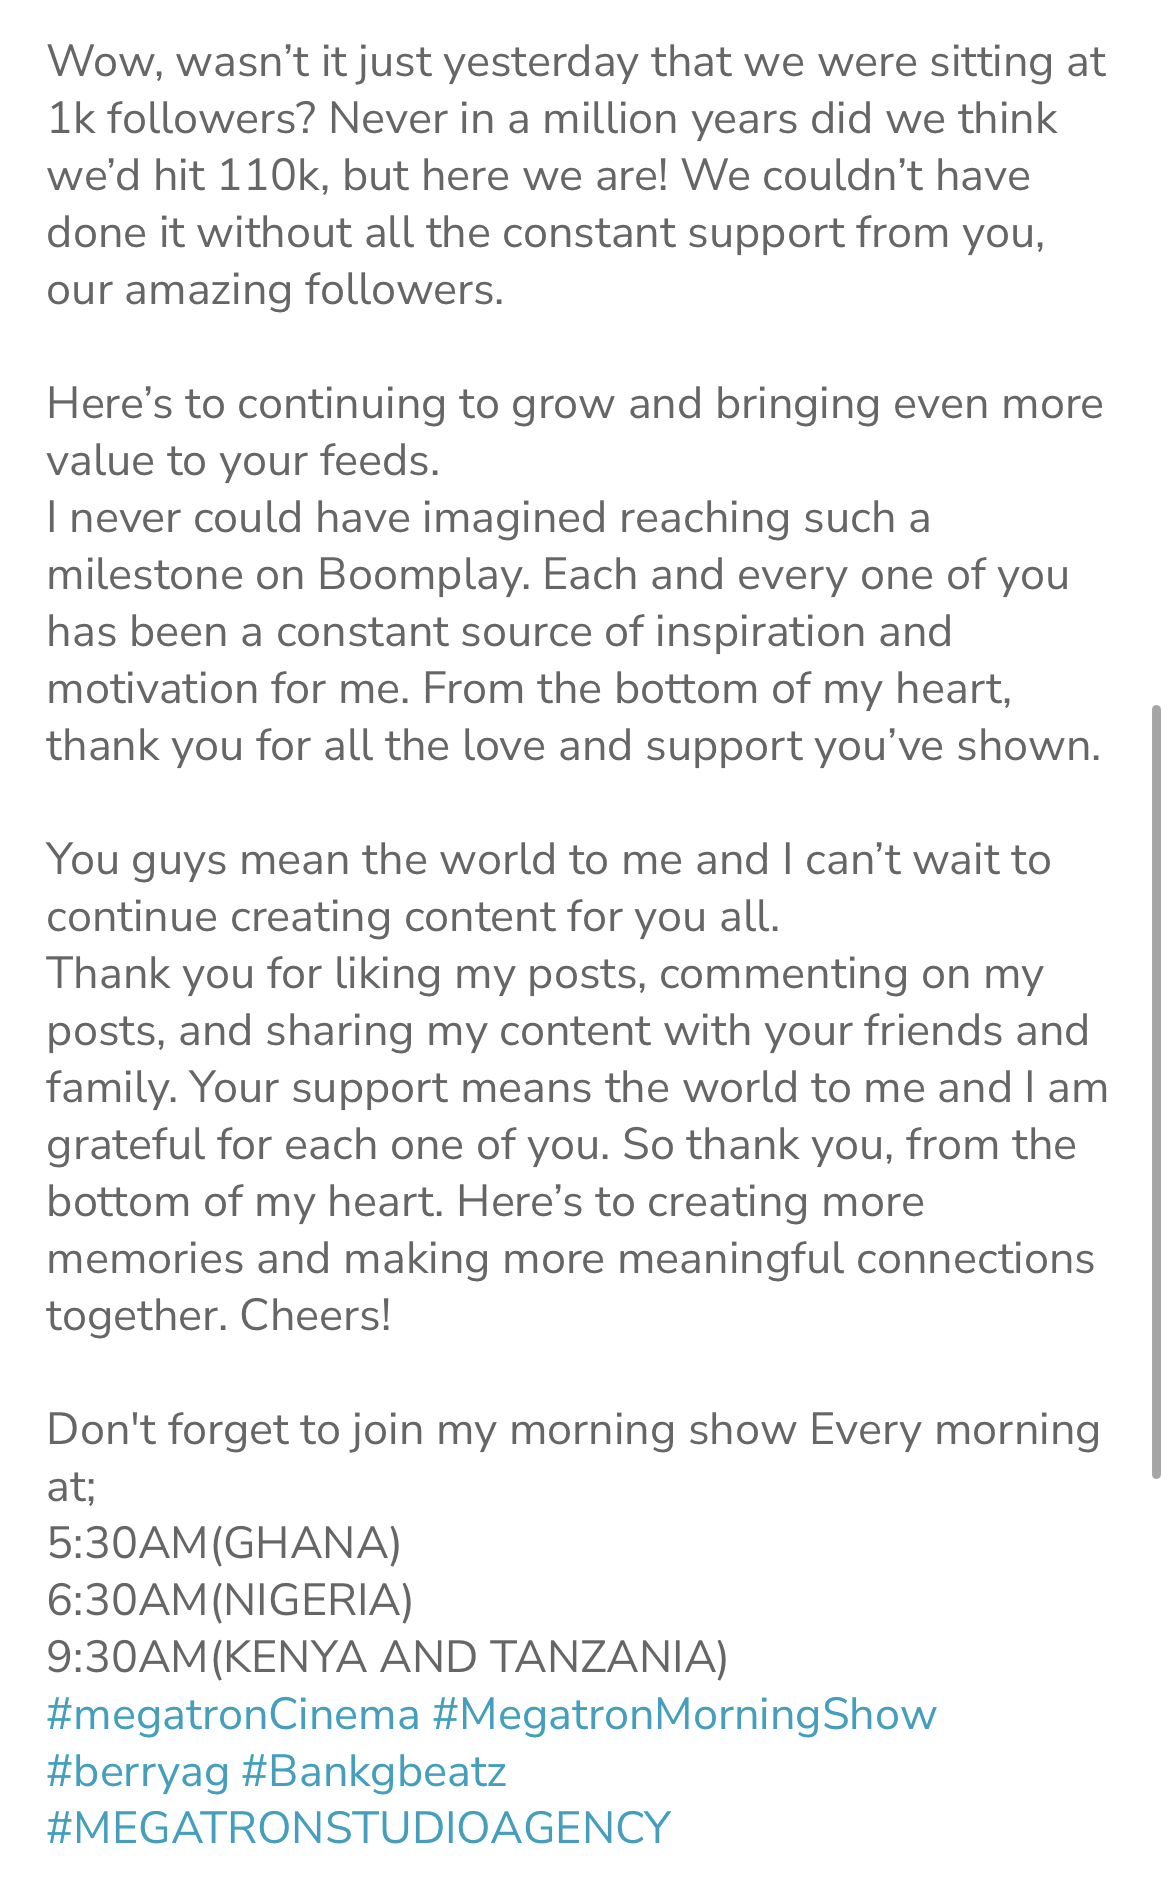 [BoomLive Experience] Megatron Cinema Shares Her Experience on BoomLive